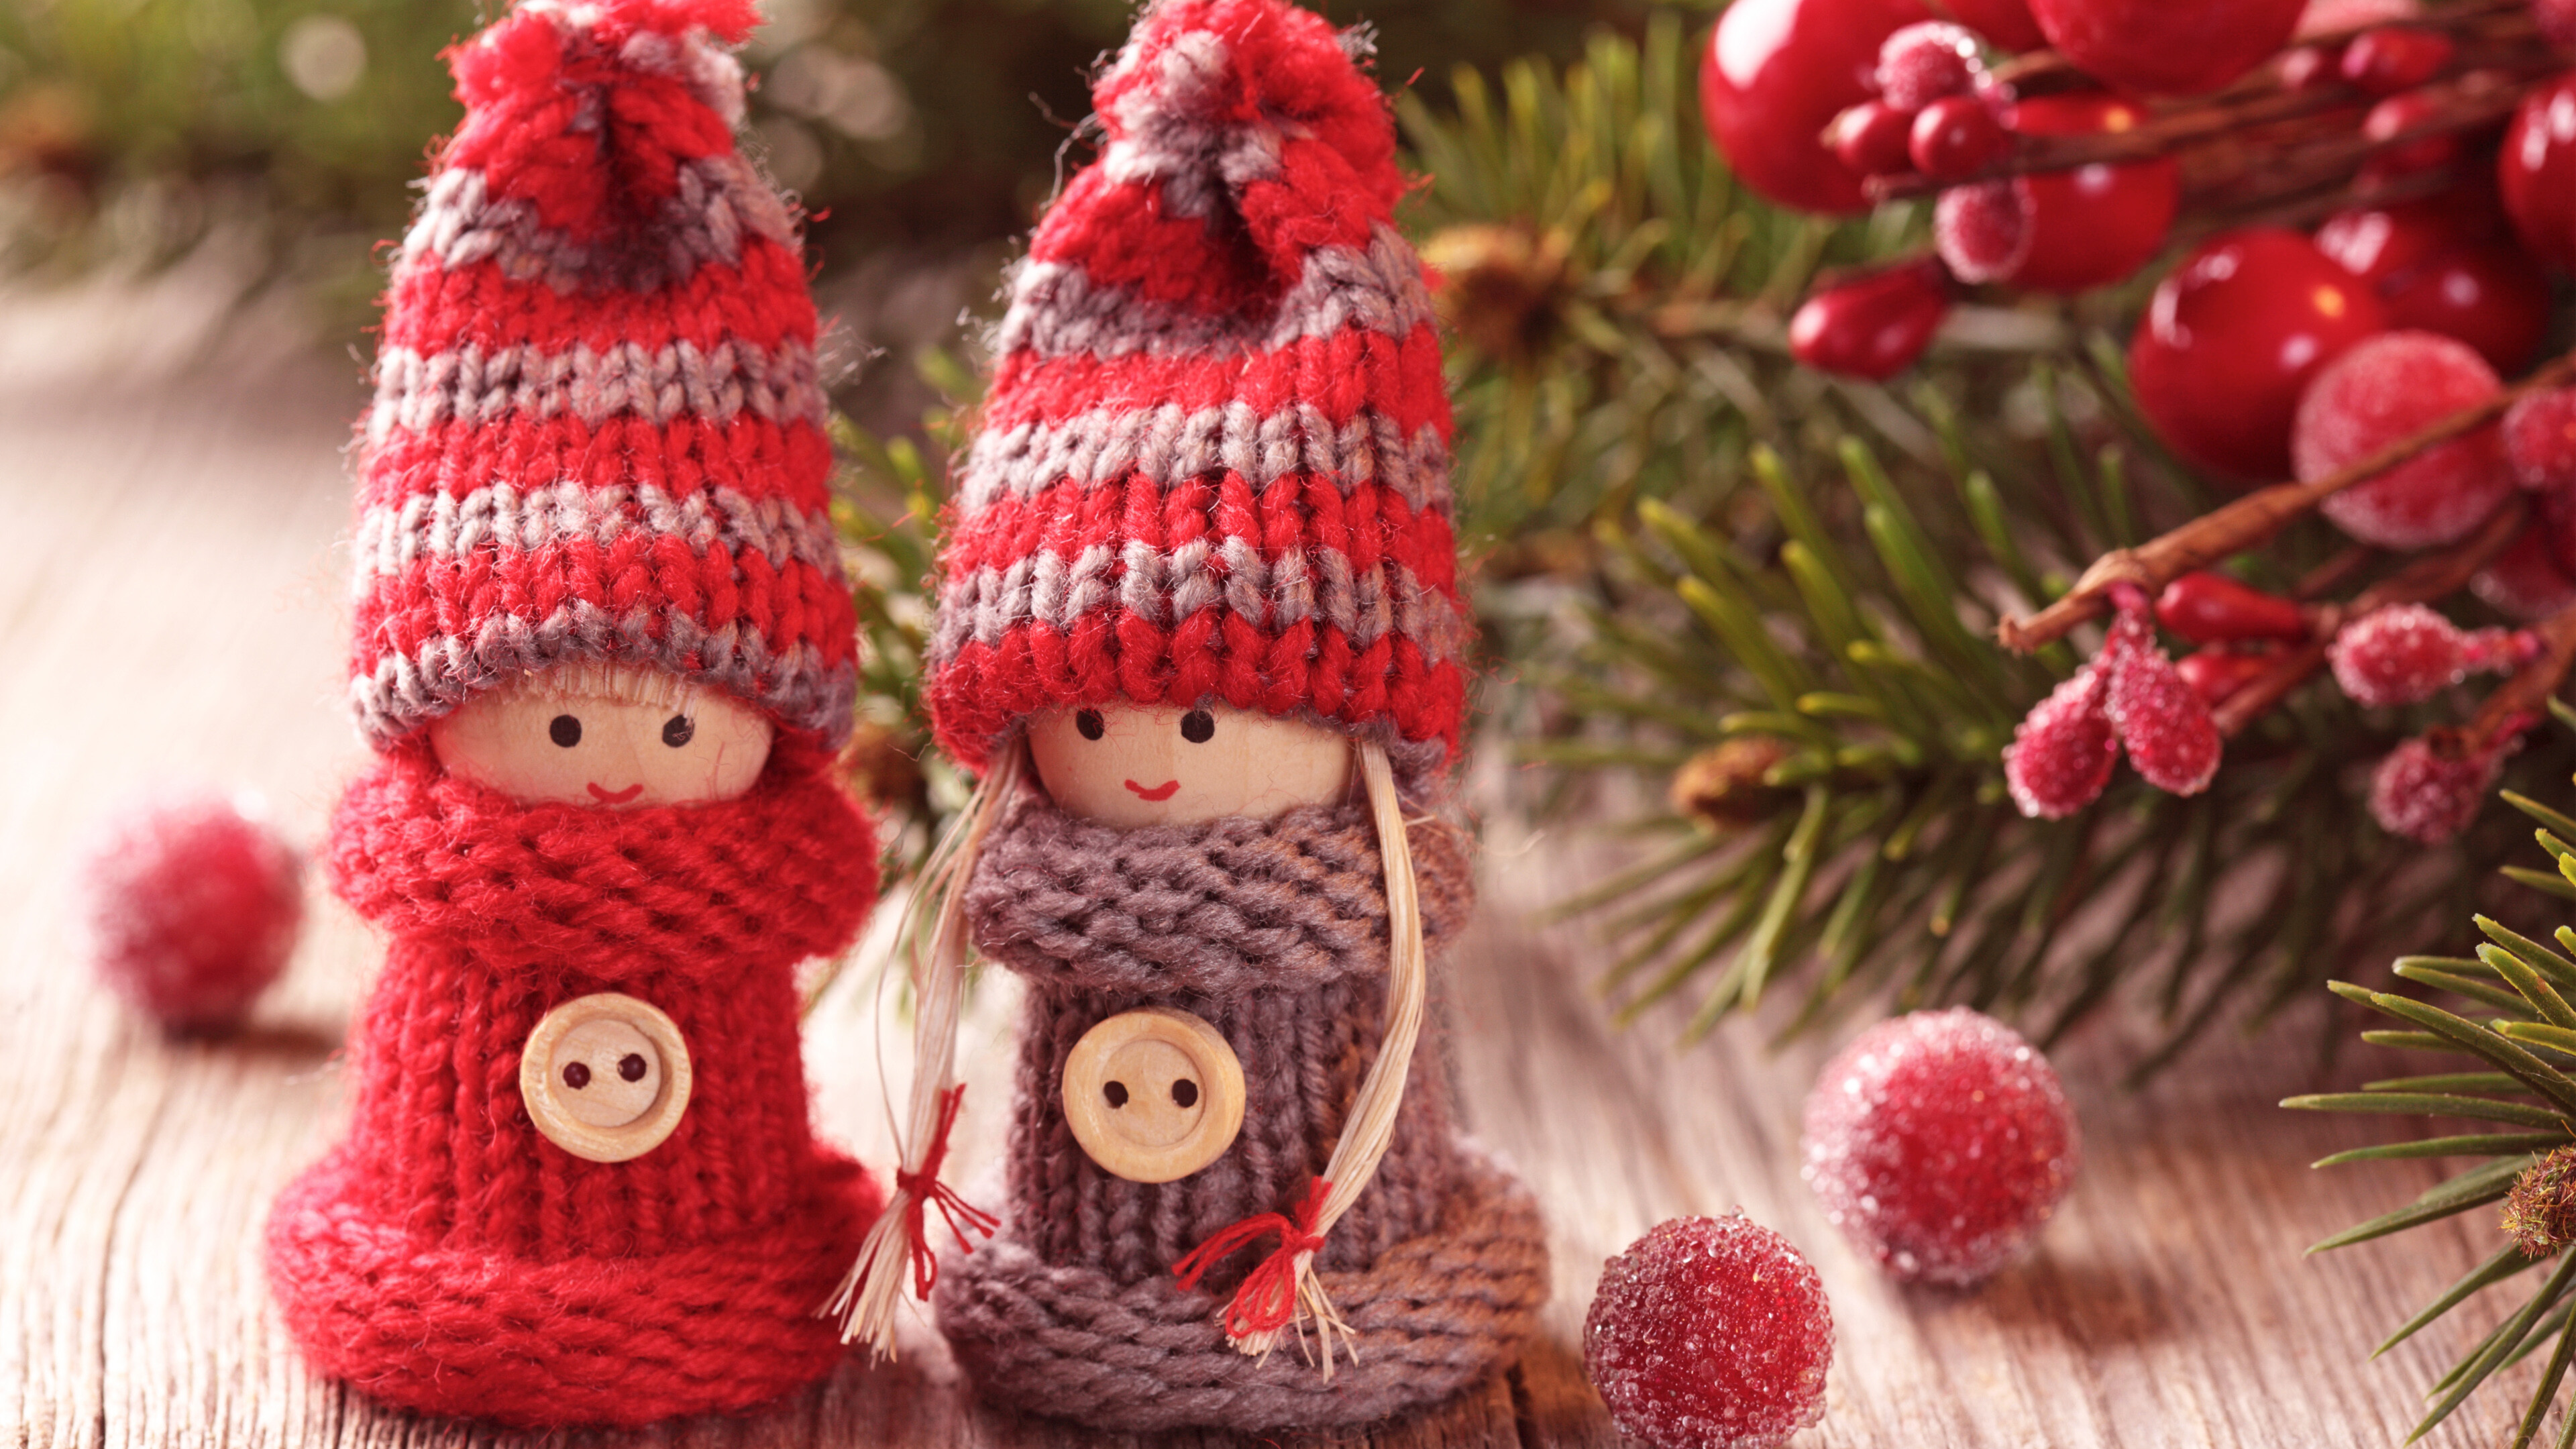 Decorations: Christmas ornament, Toys, Knitted Toys, Dolls, Celebrations. 3840x2160 4K Background.